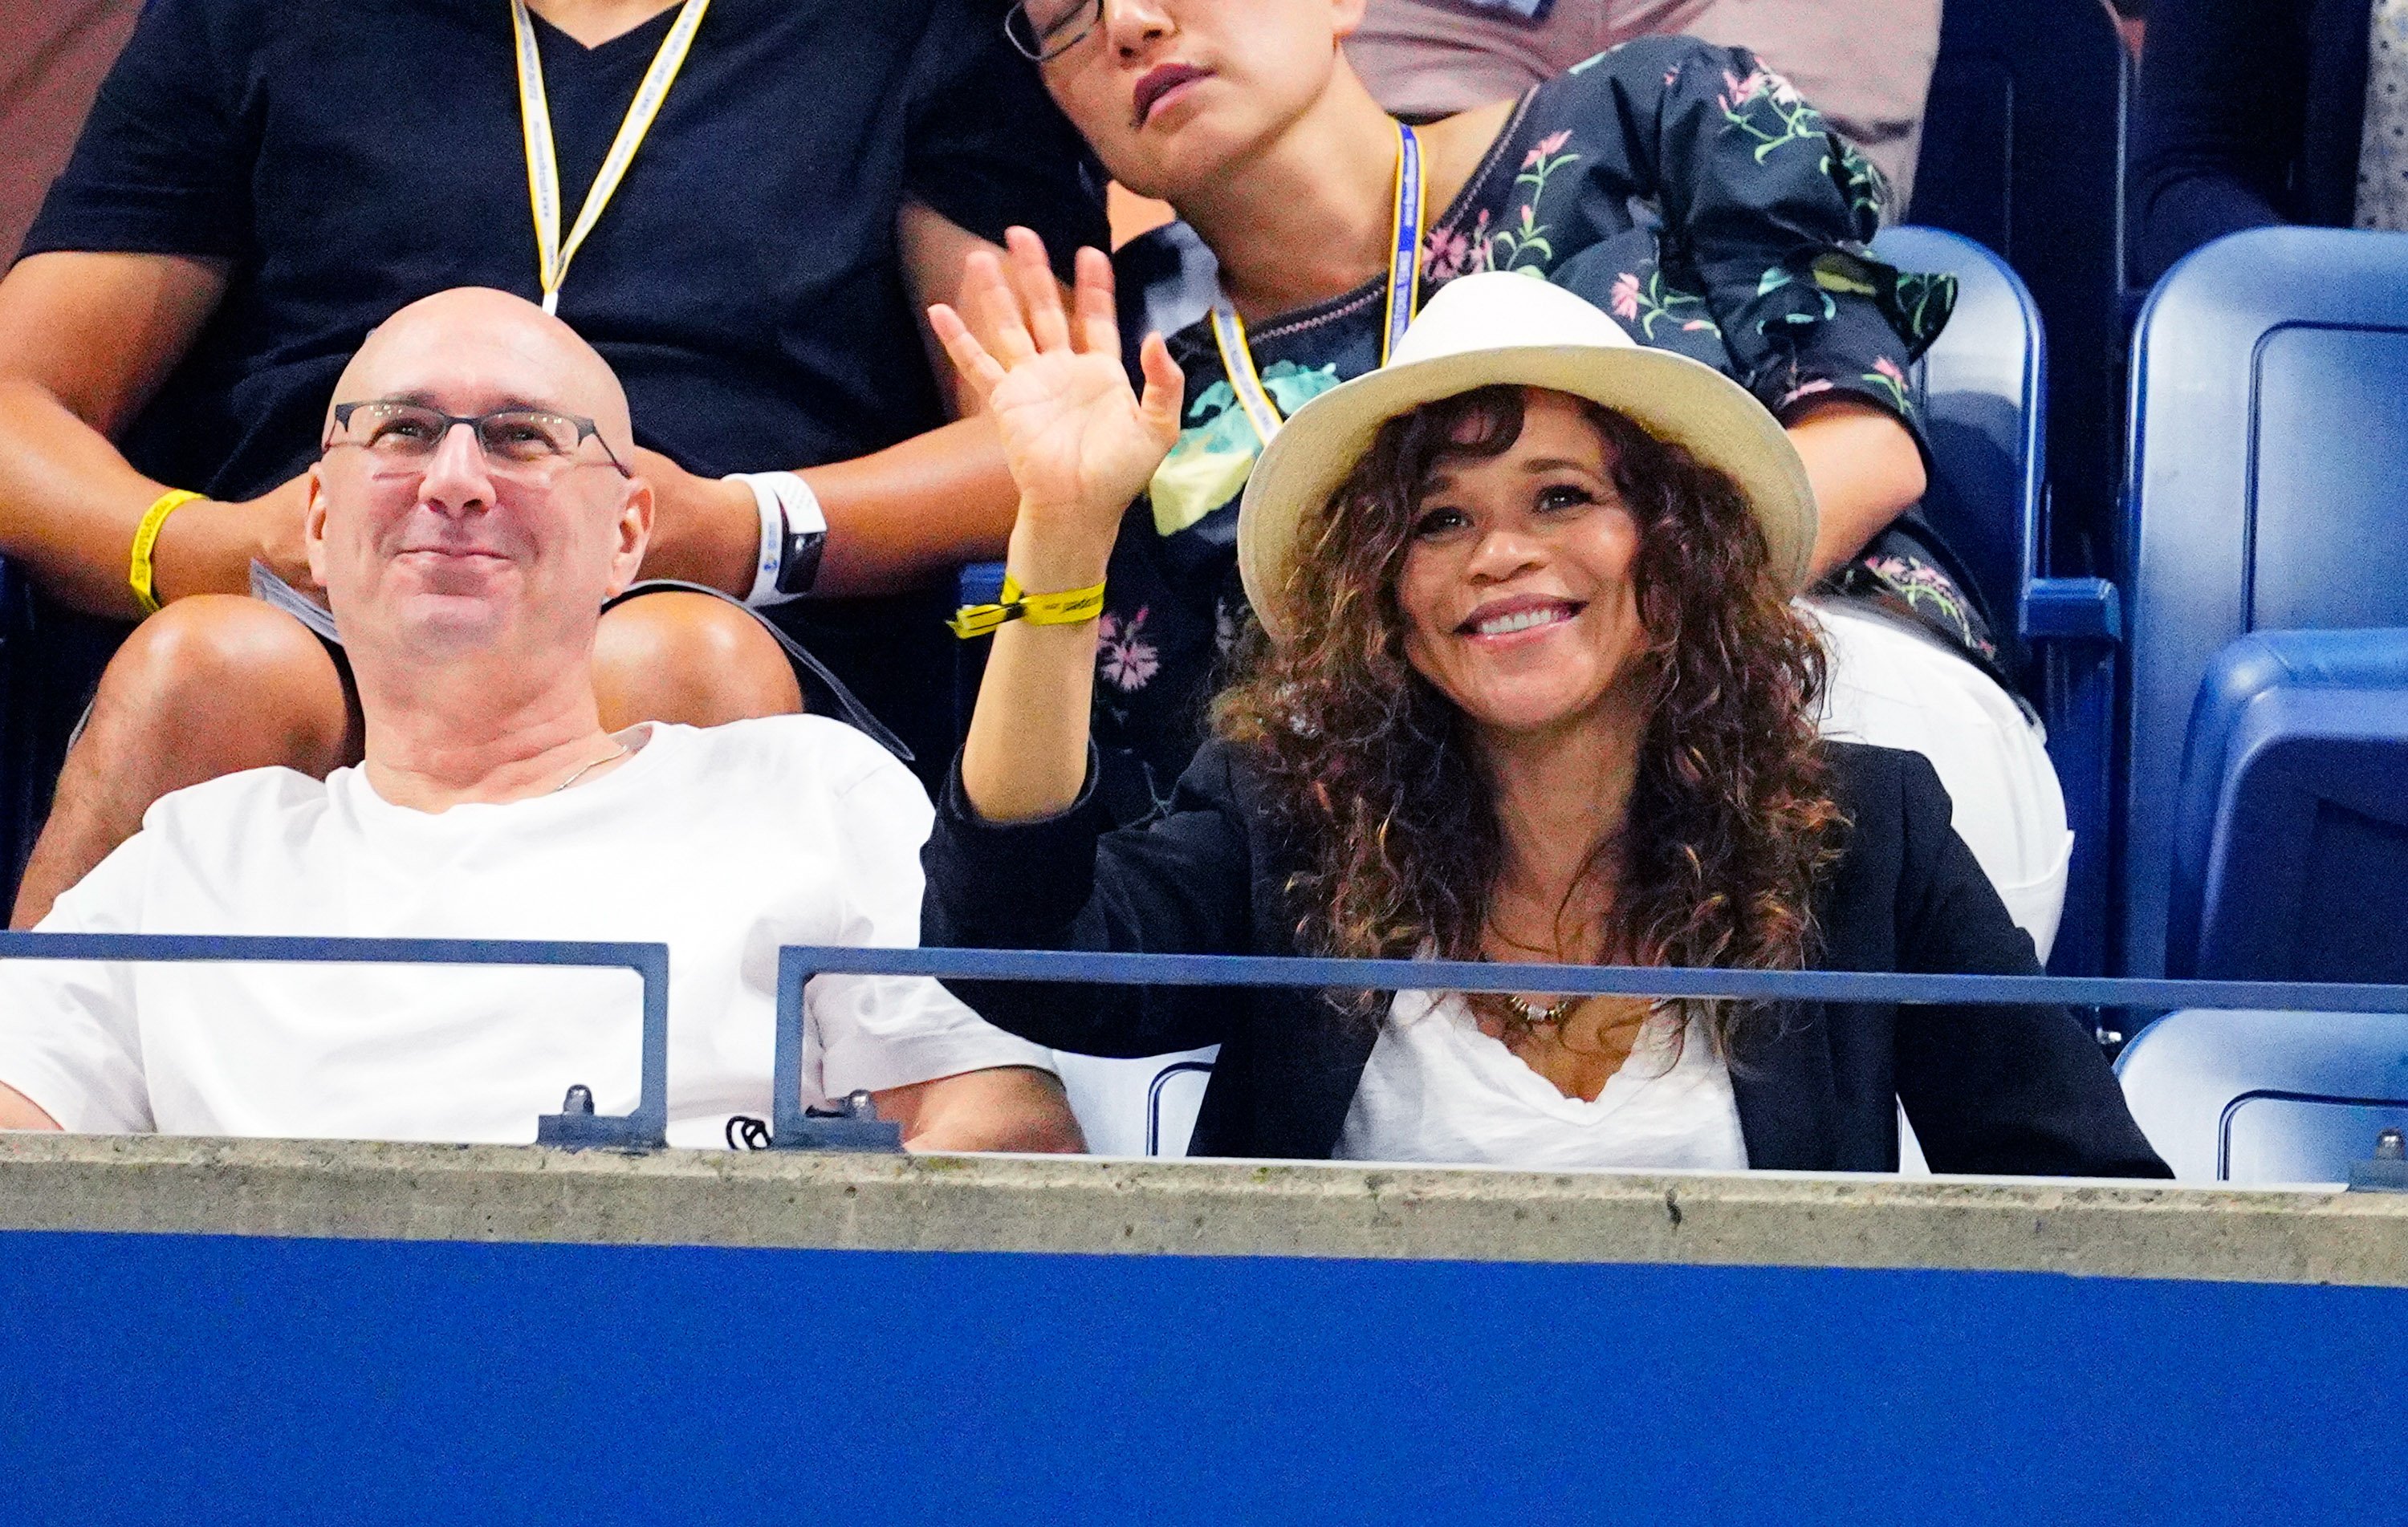 Eric Haze and Rosie Perez at the 2019 US Open in New York City on September 2, 2019. | Source: Getty Images